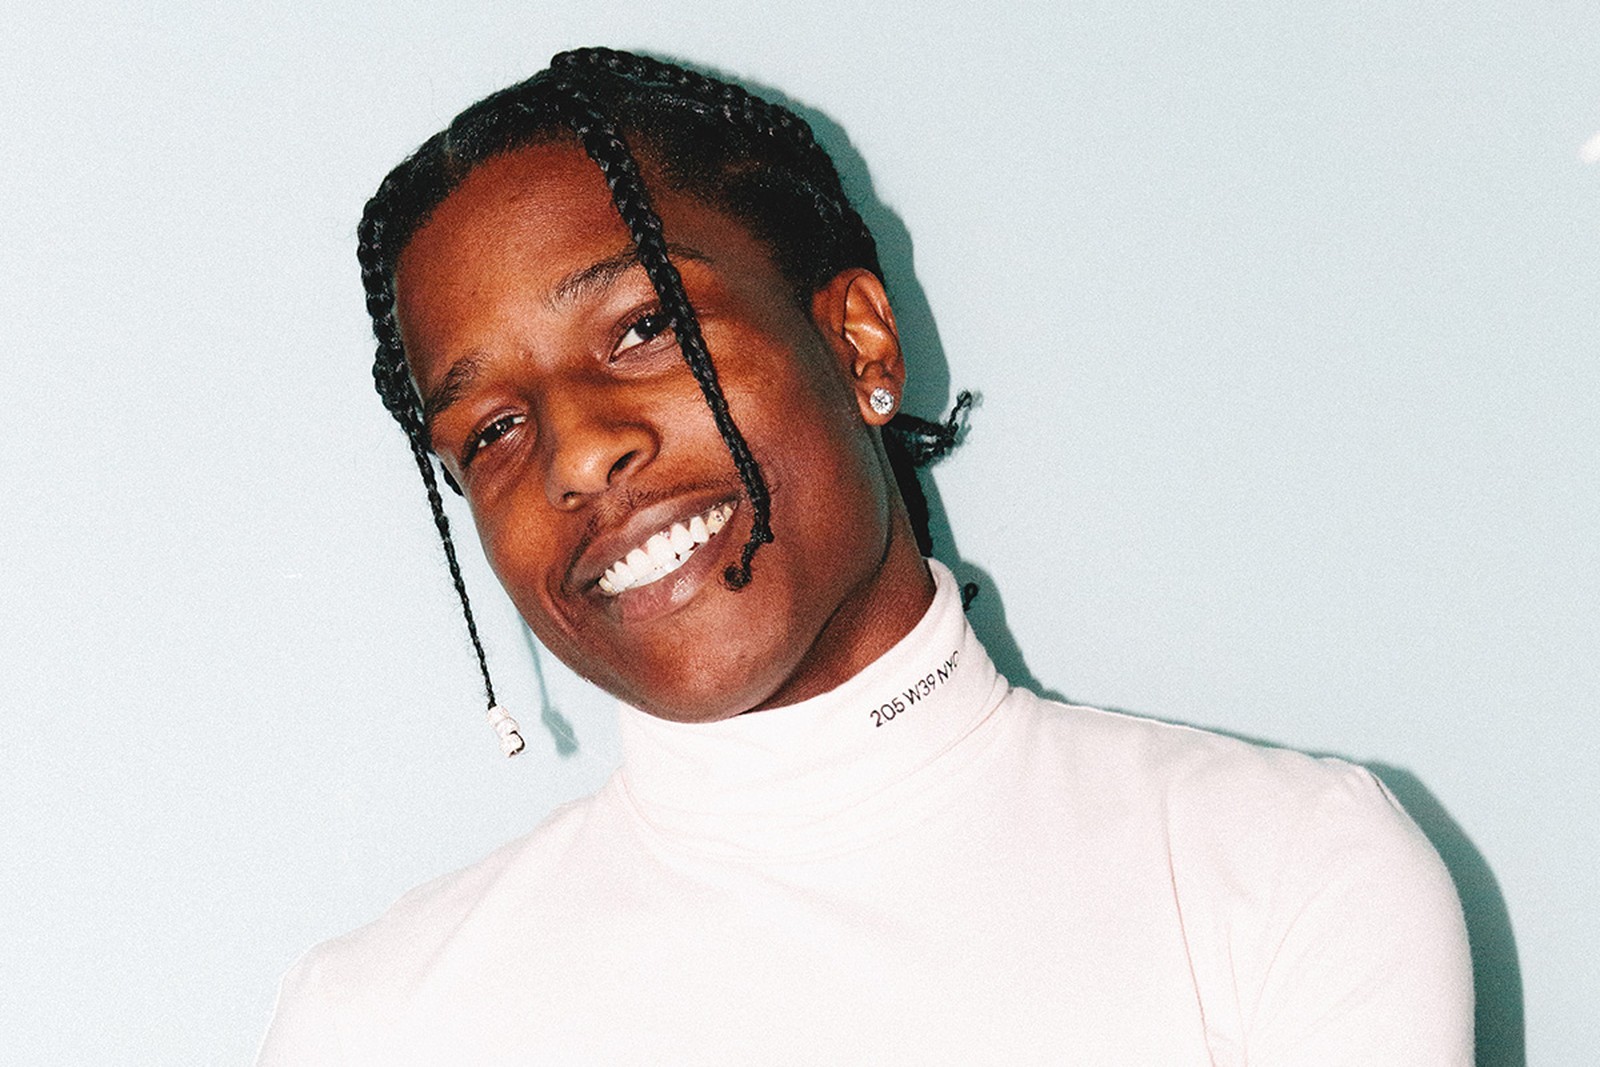 The Prettiest Man Alive: A$AP Rocky's Influence on Fashion